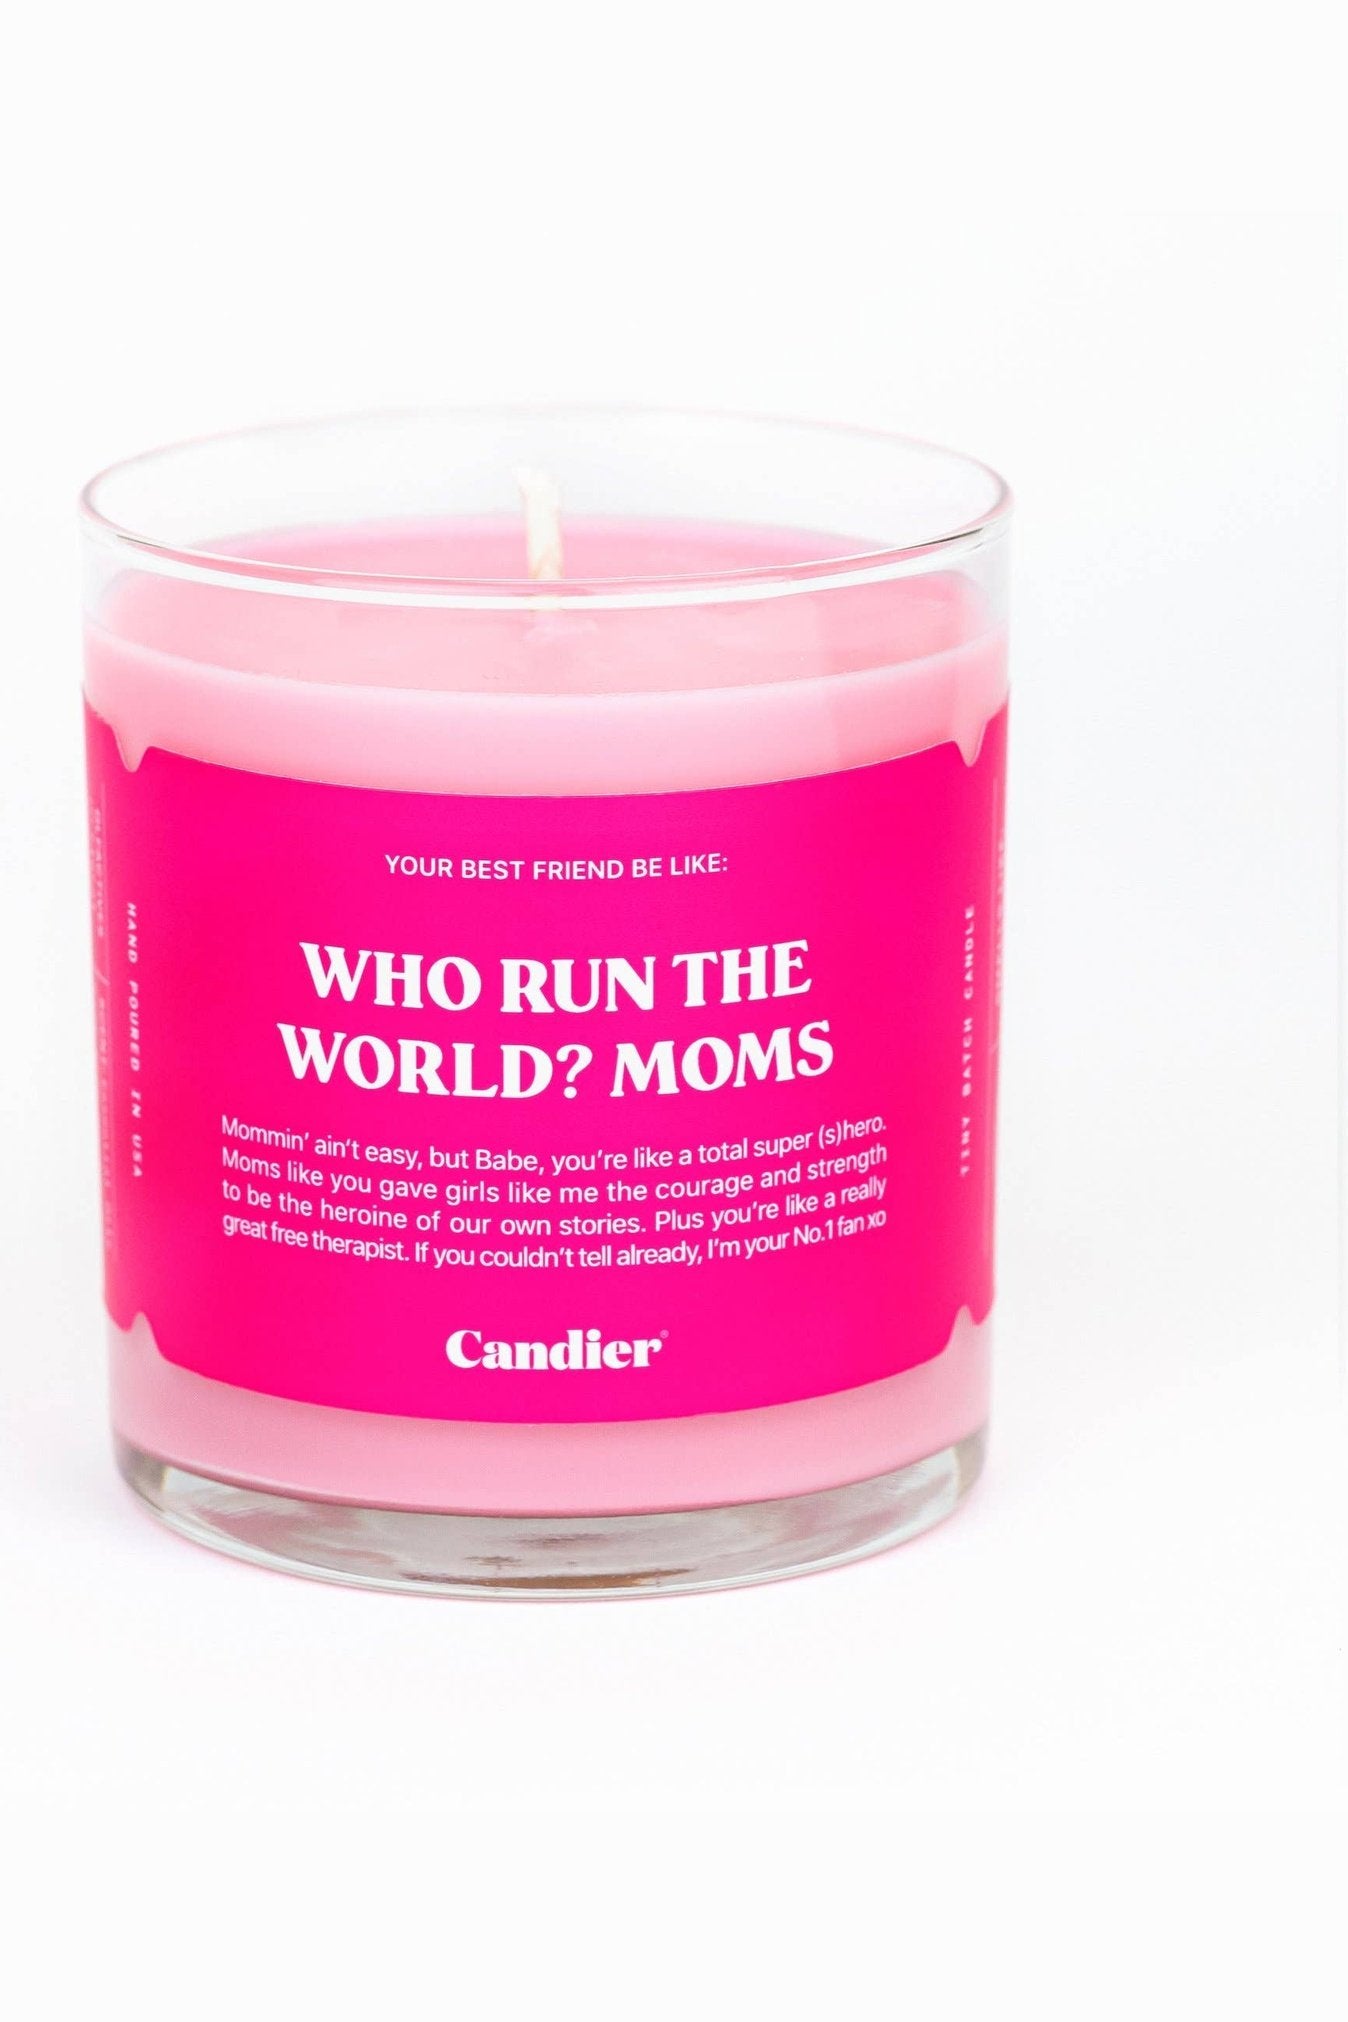 Candier - WHO RUN THE WORLD? MOMS. CANDLE